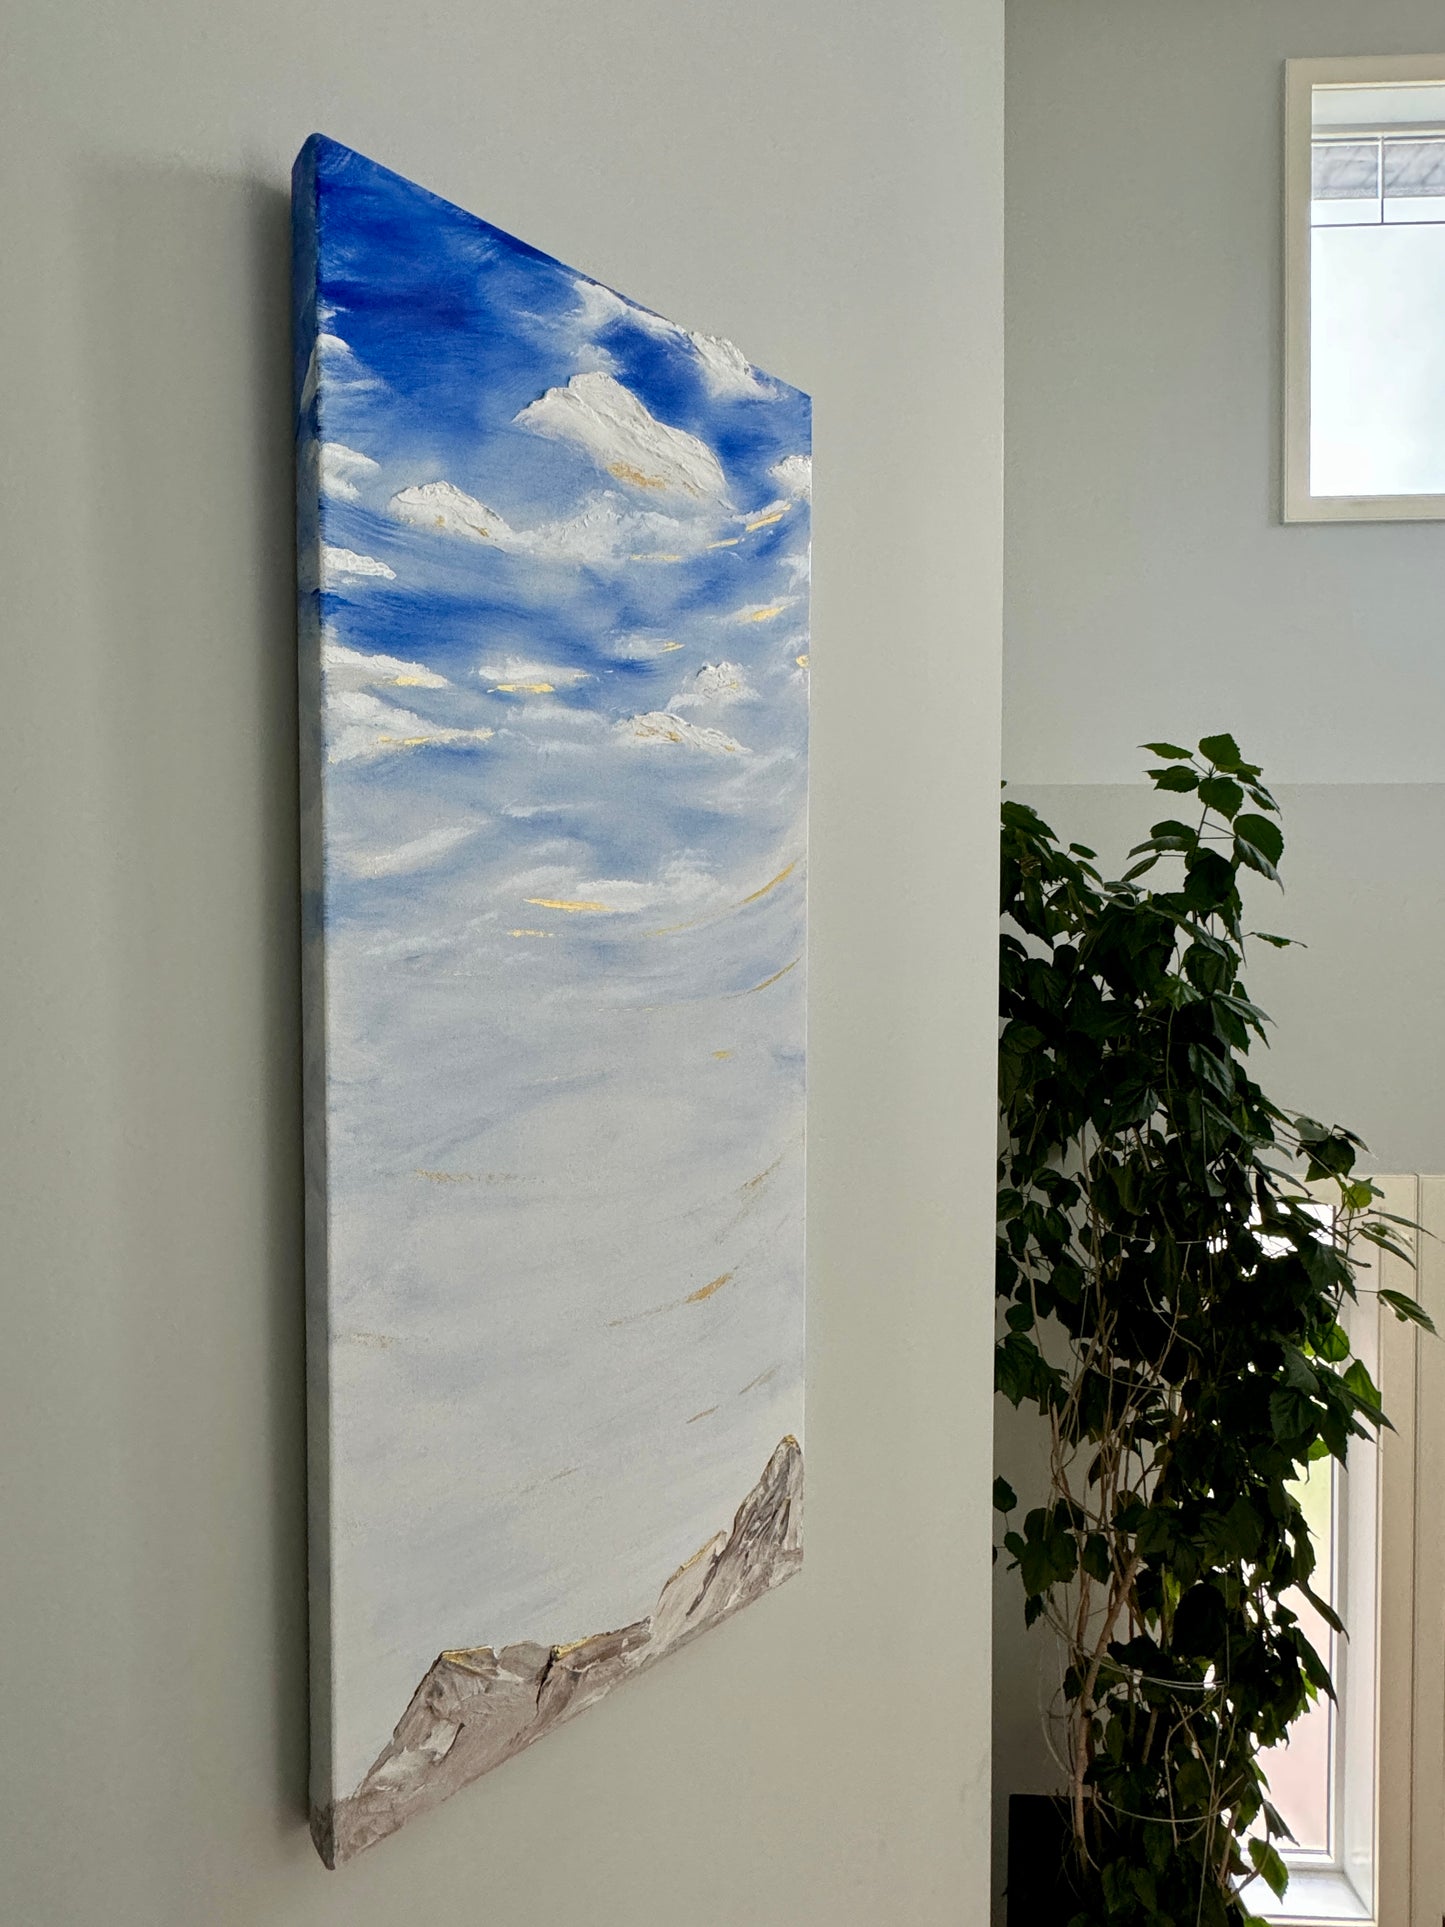 Breezy. Texture and acrylic on canvas. 16 x 40 inches.